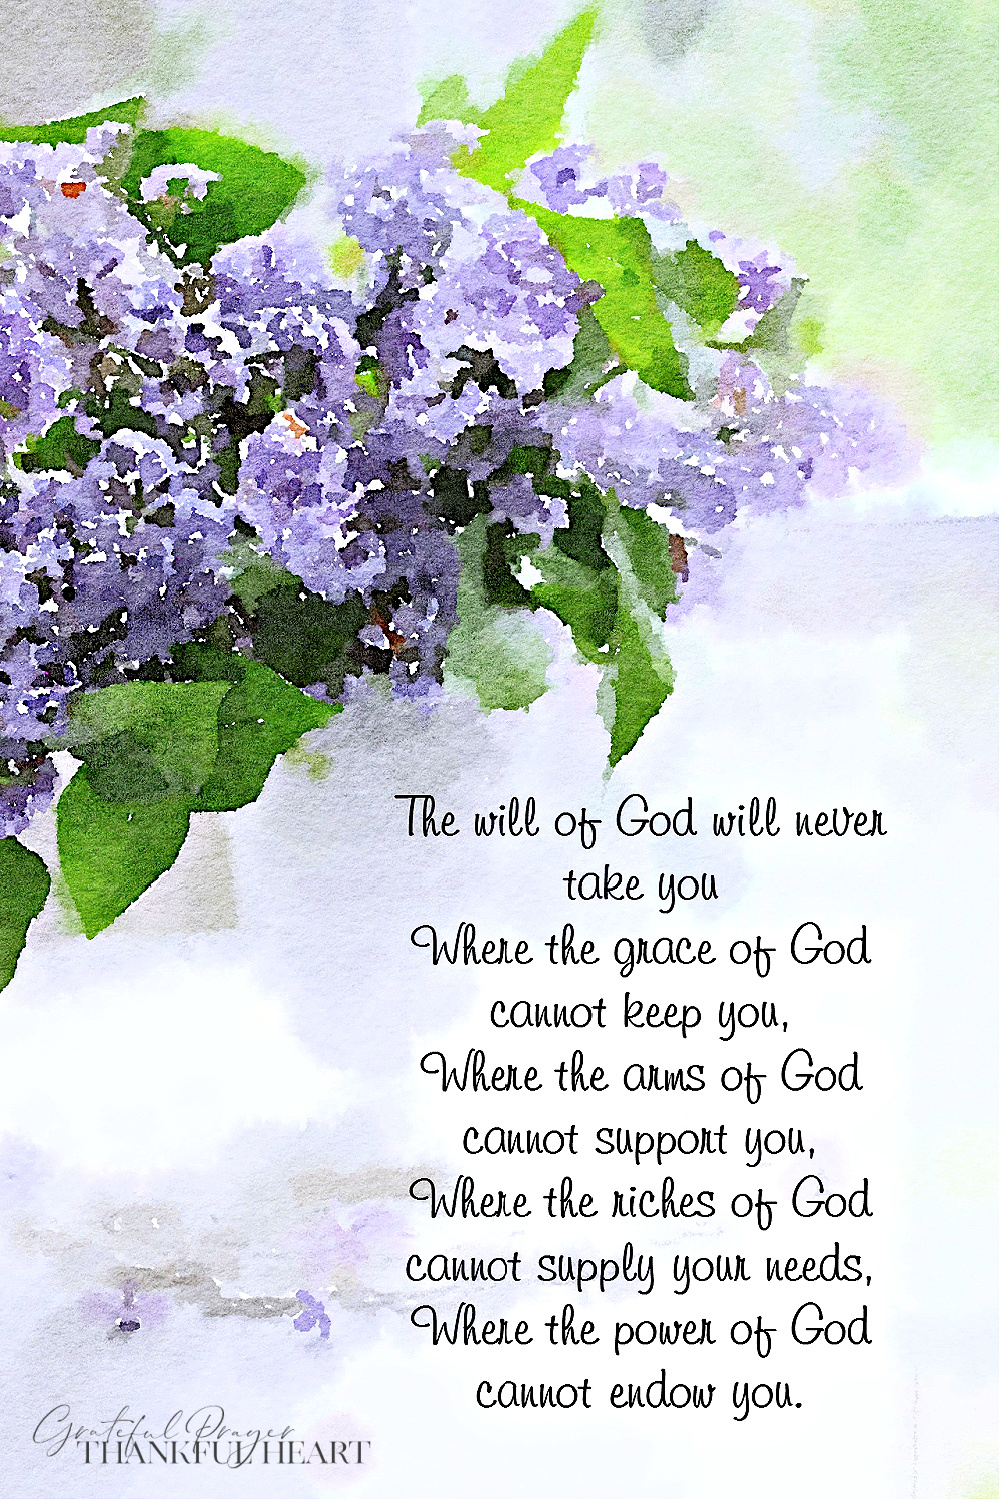 The will of God will never take you, Where the grace of God cannot keep you, Where the arms of God cannot support you.